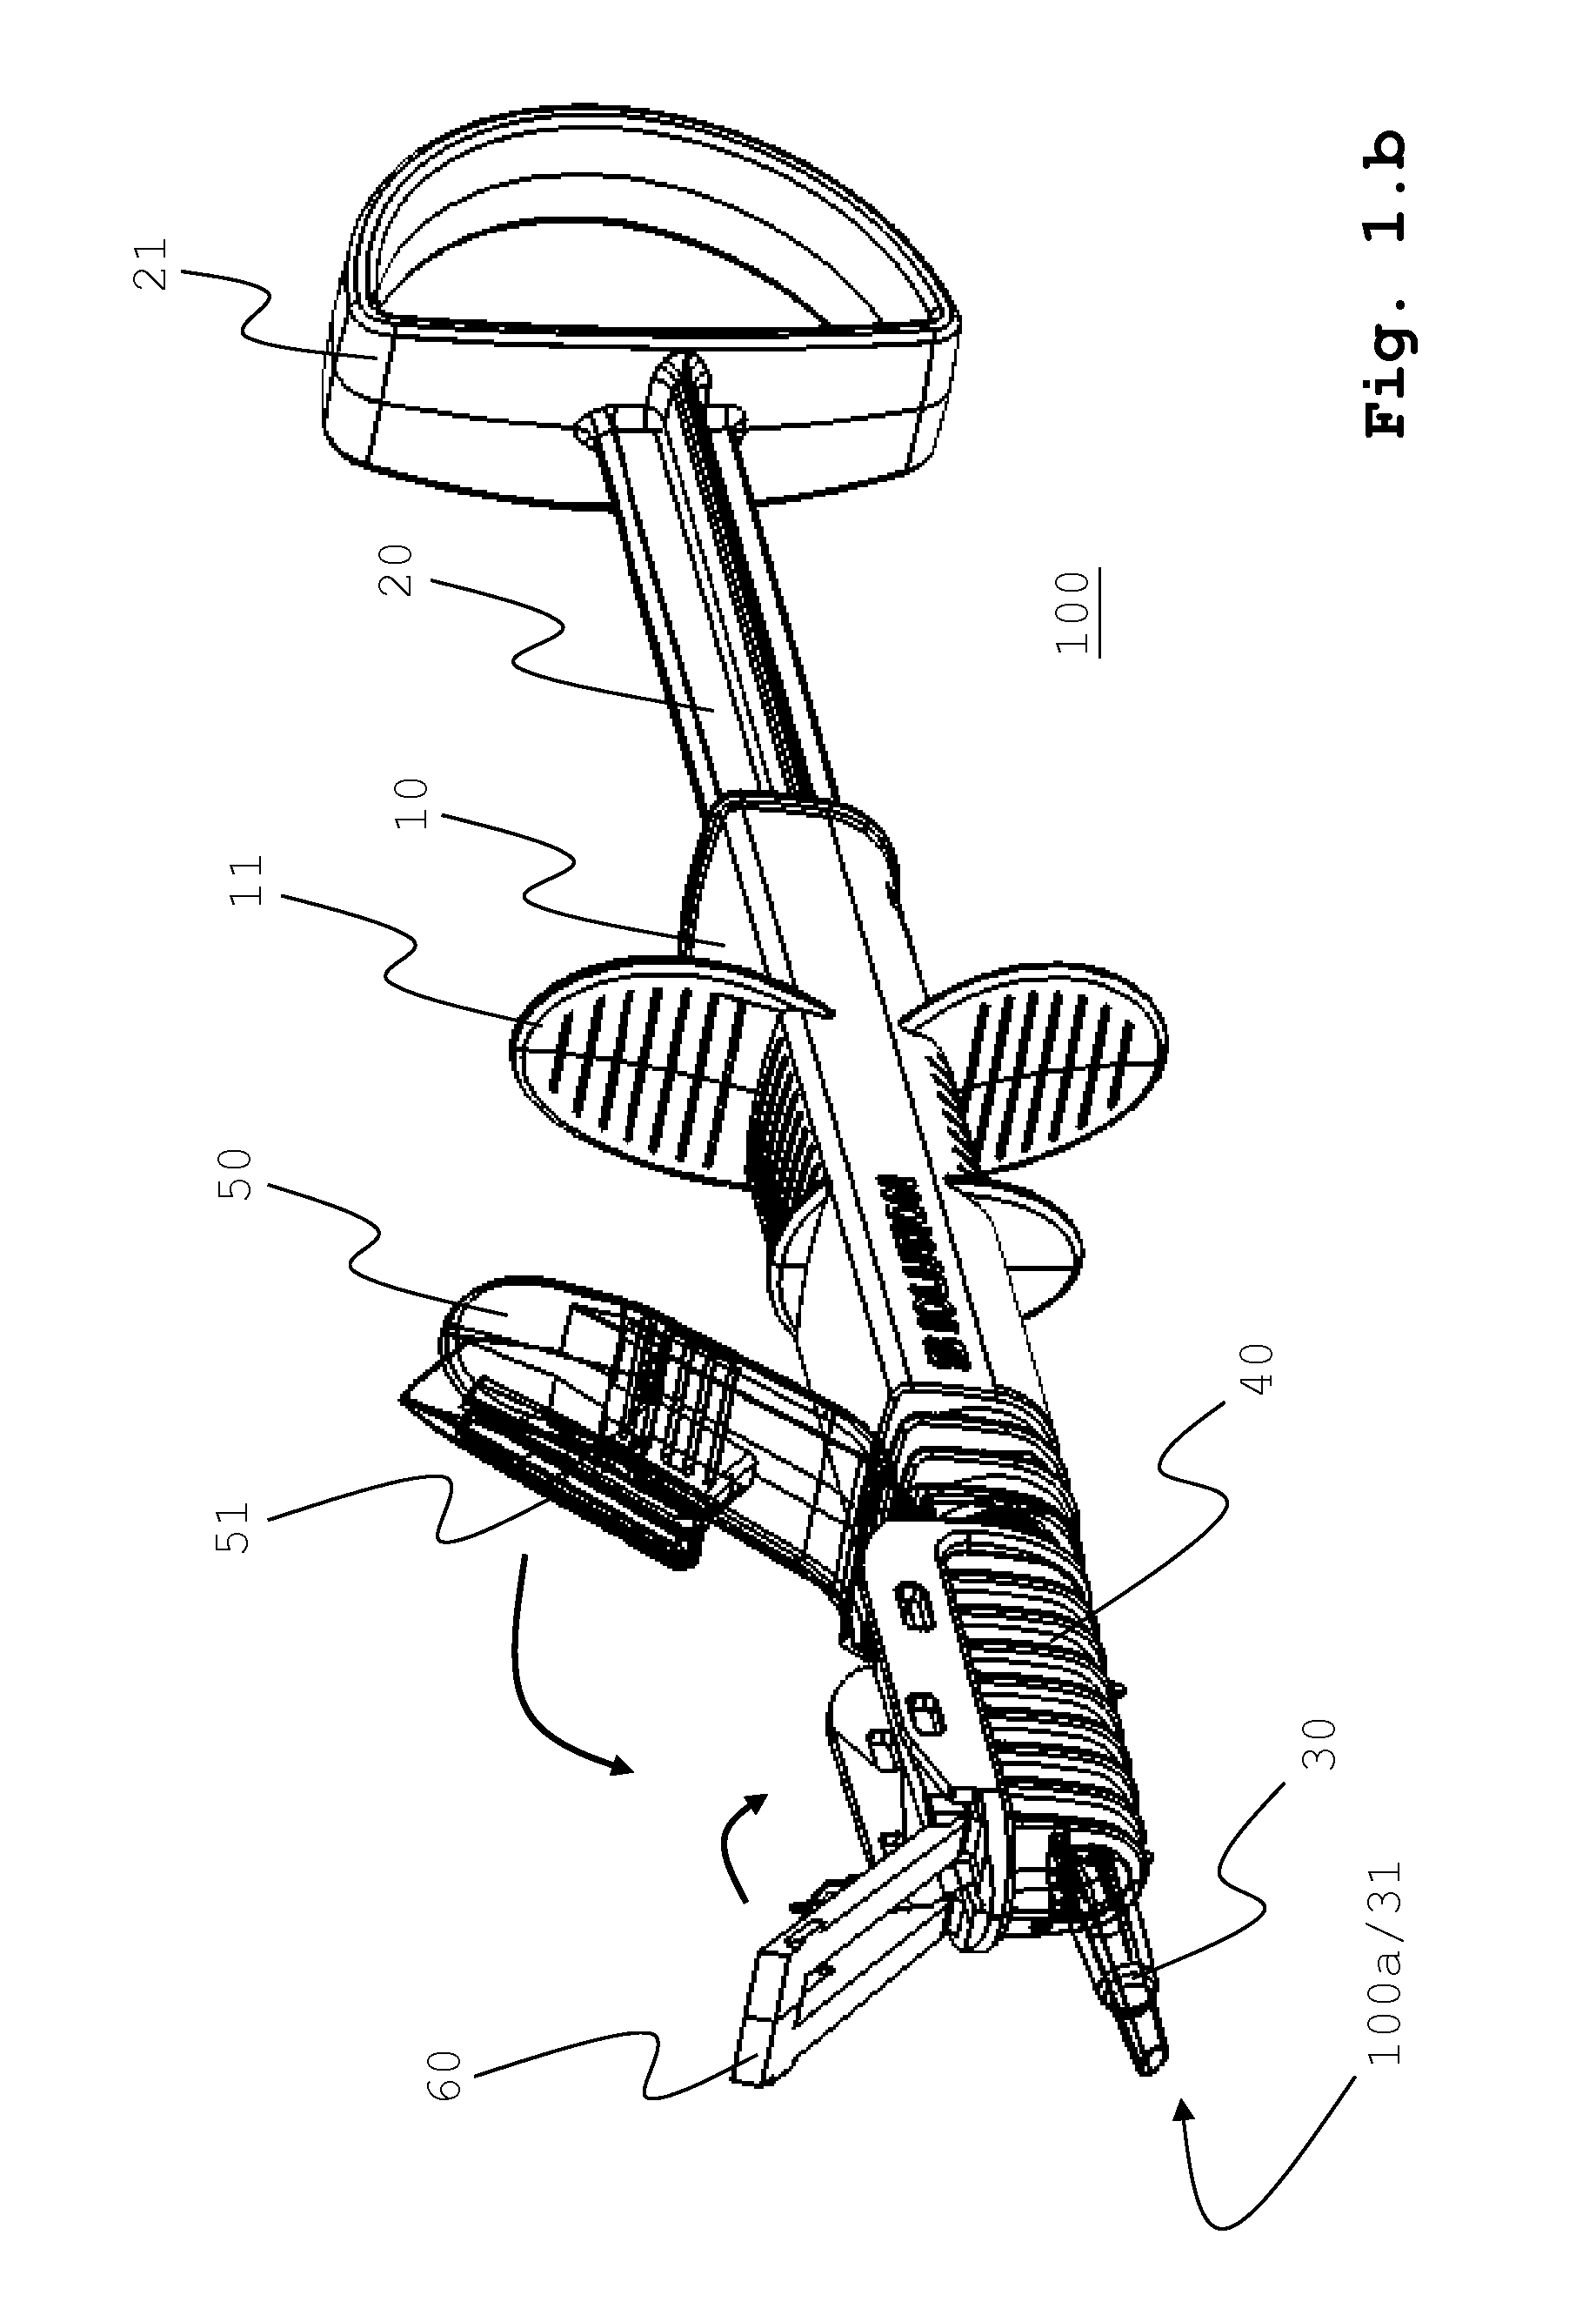 Injector for implanting an intraocular lens